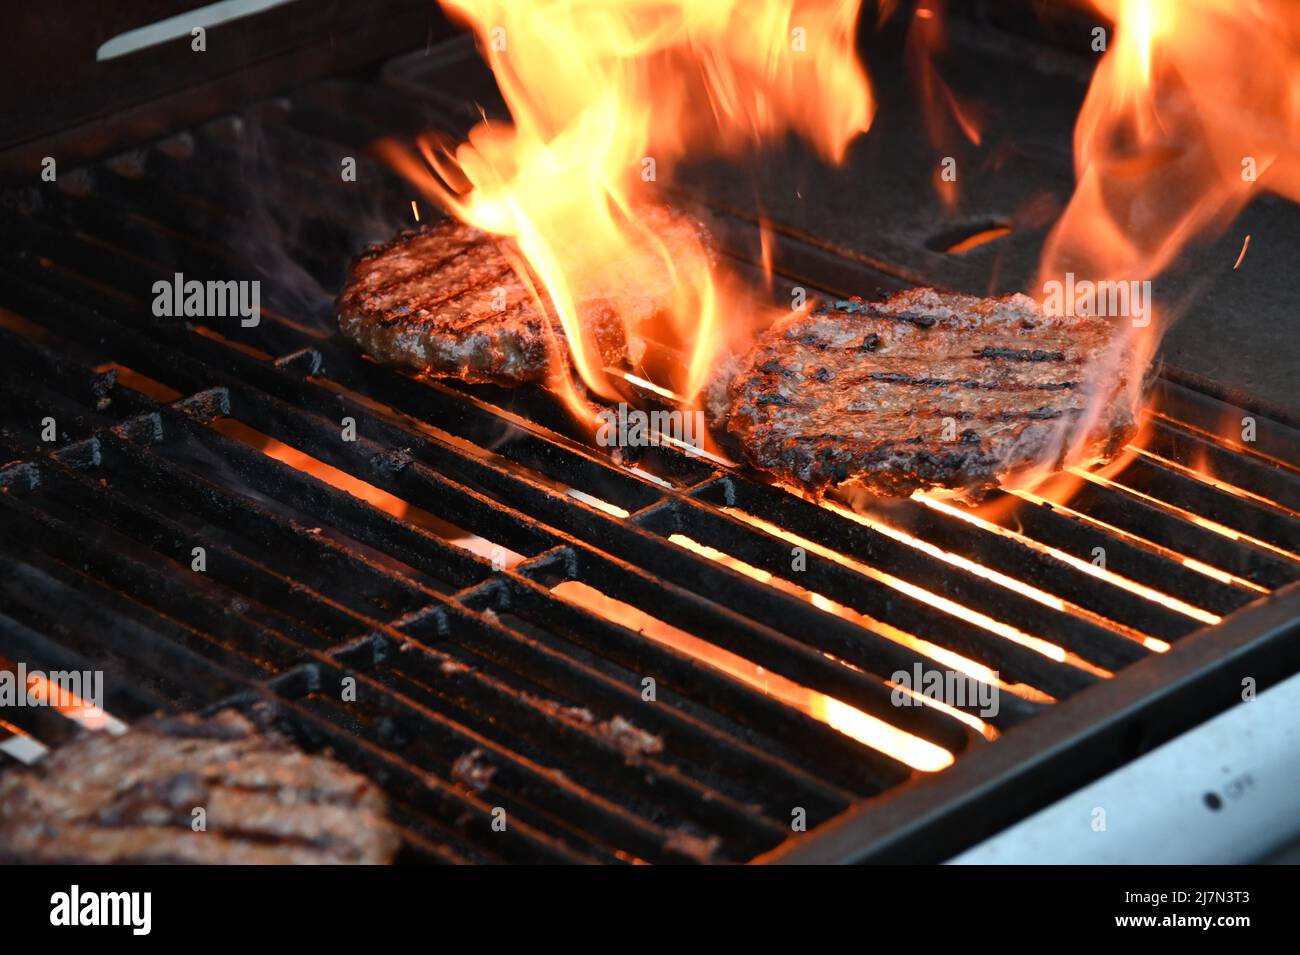 Flamed grilled beef burgers barbecued on an outdoor BBQ Stock Photo